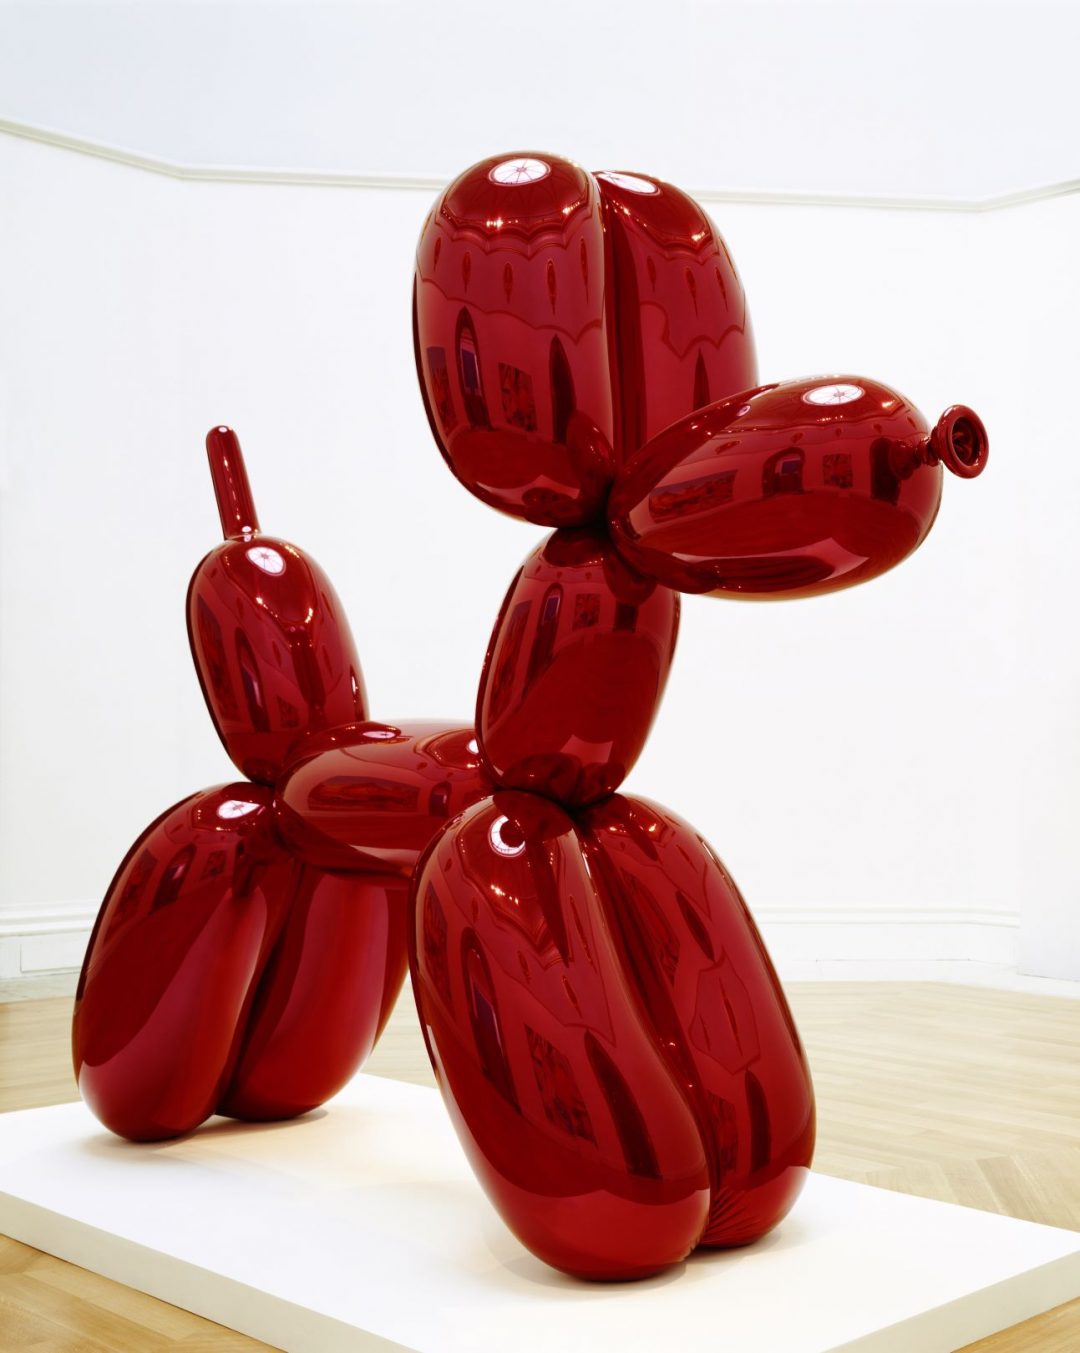 Mostre autunno 2021 Jeff Koons Palazzo Strozzi Firenze